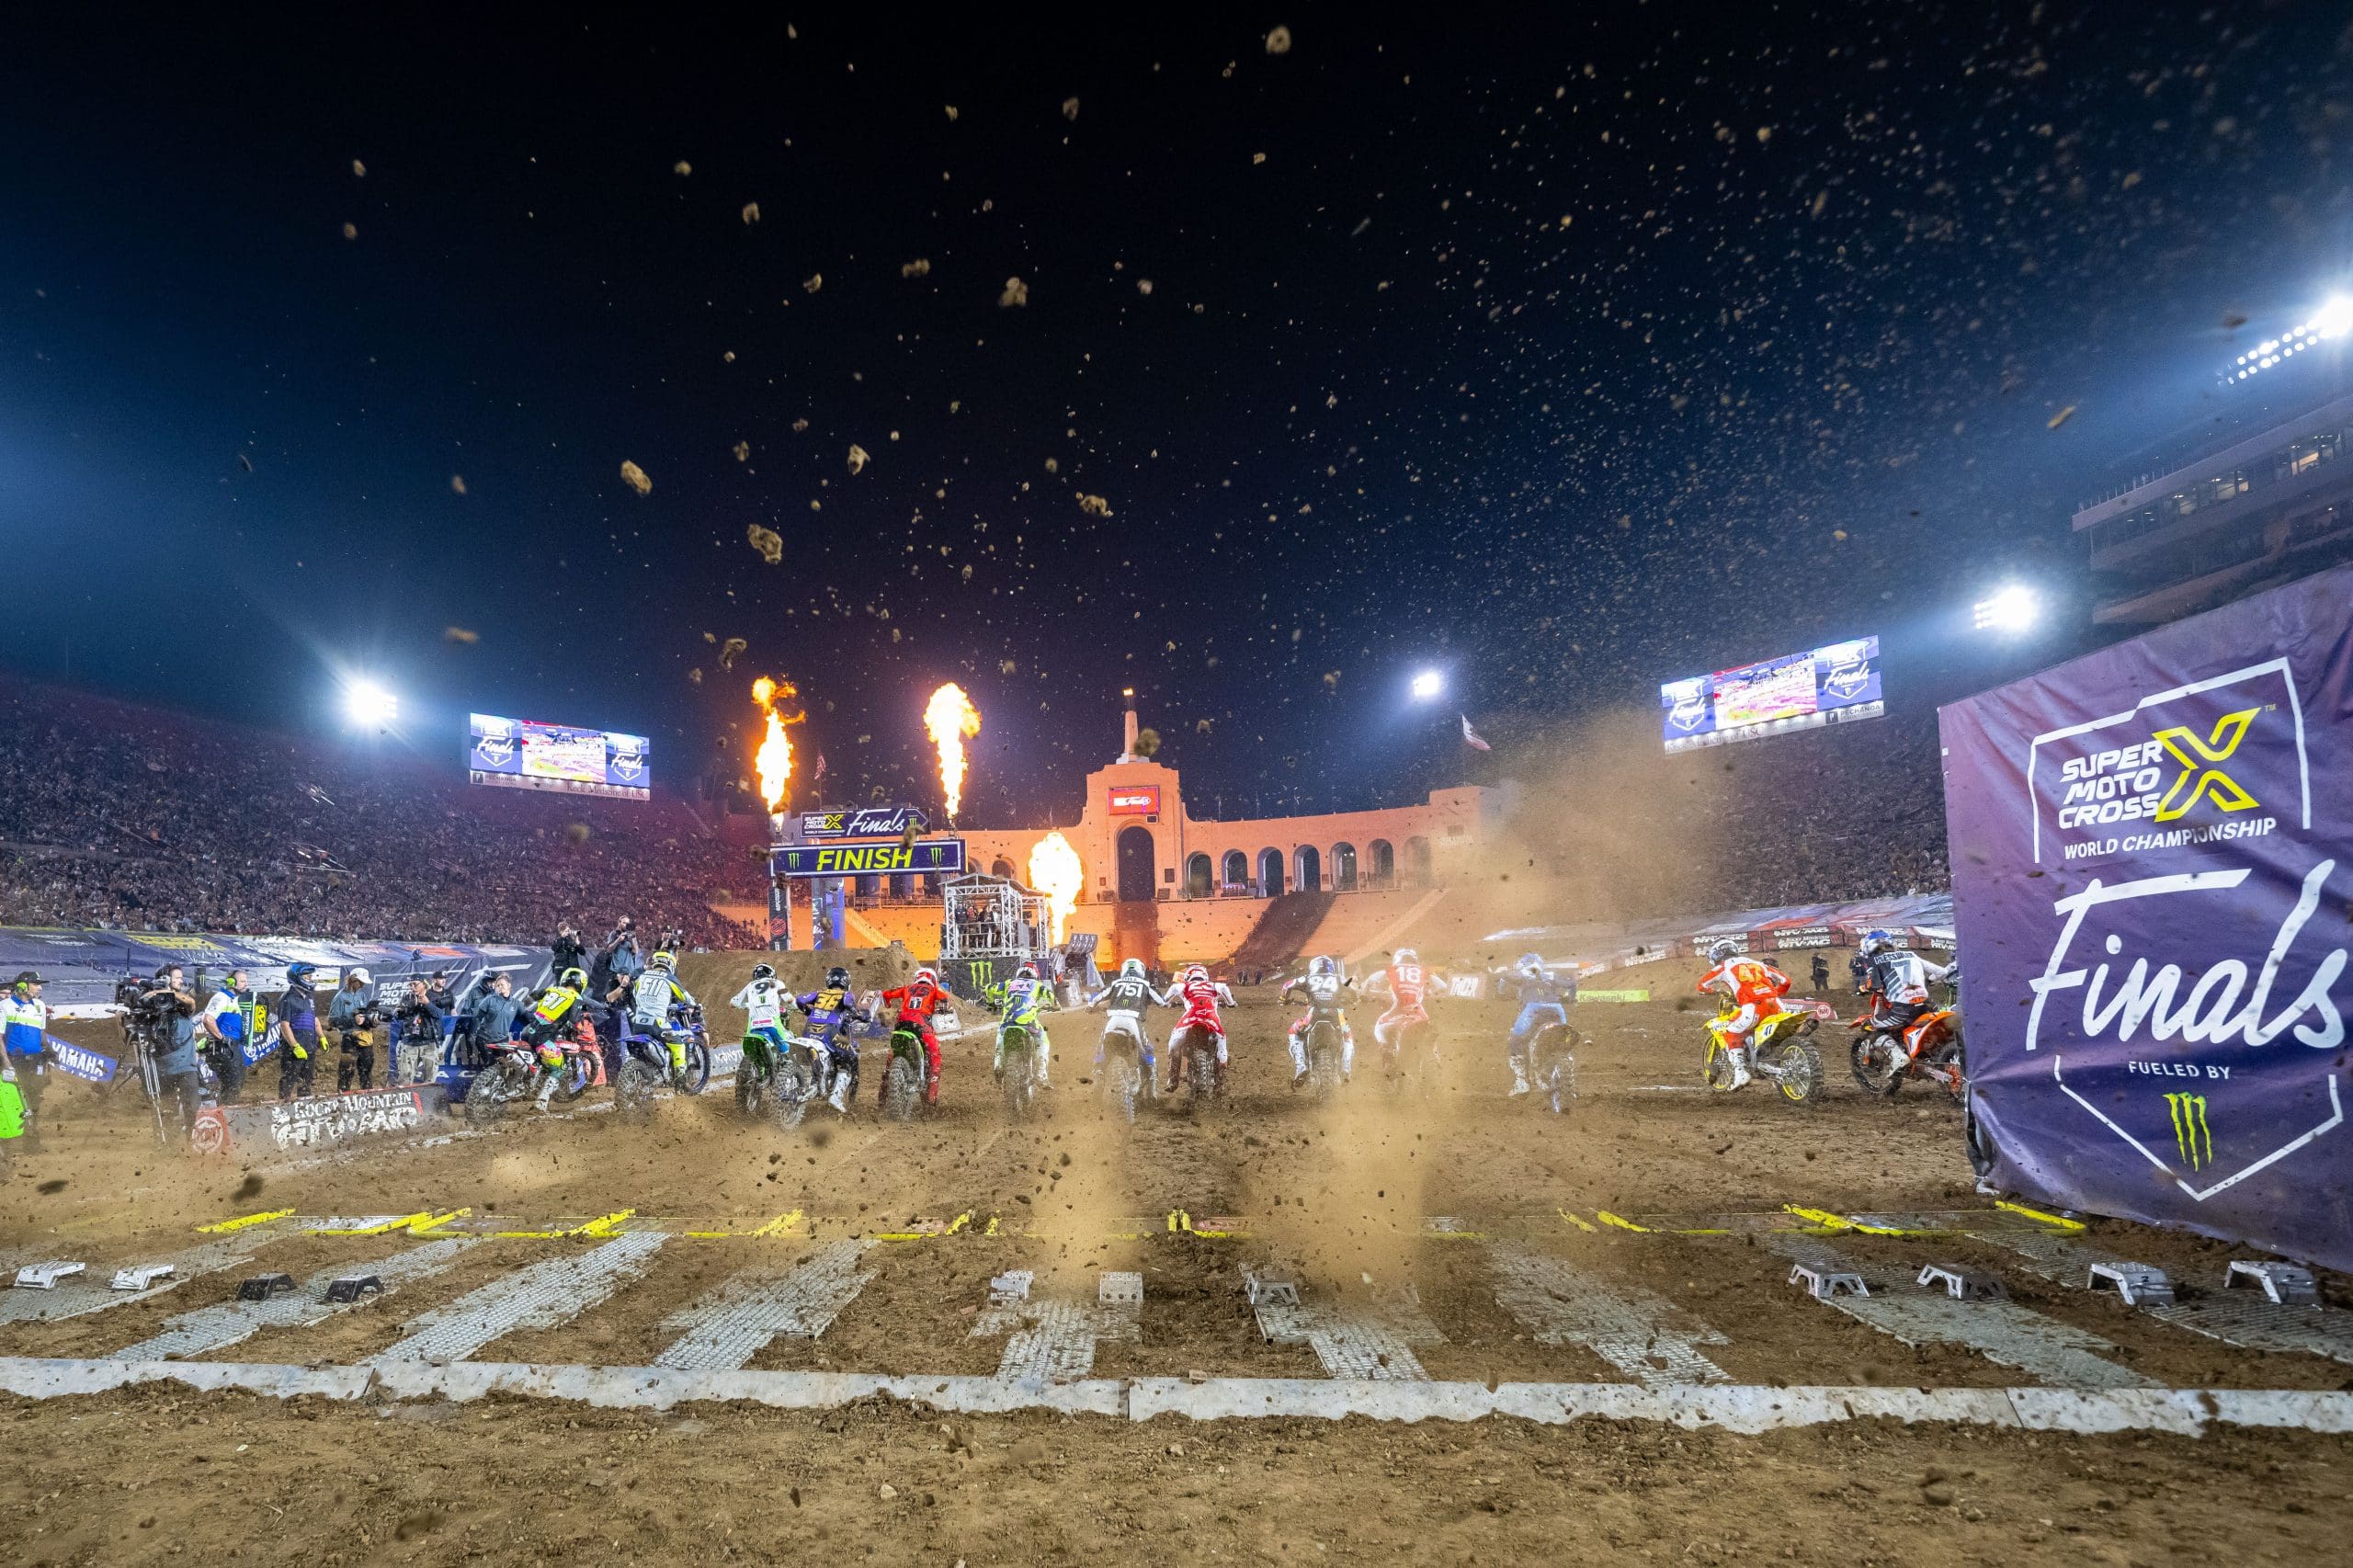 A view of the 2023 SuperMotocross World Championships! Media sourced from SuperMotocross' recent press release.